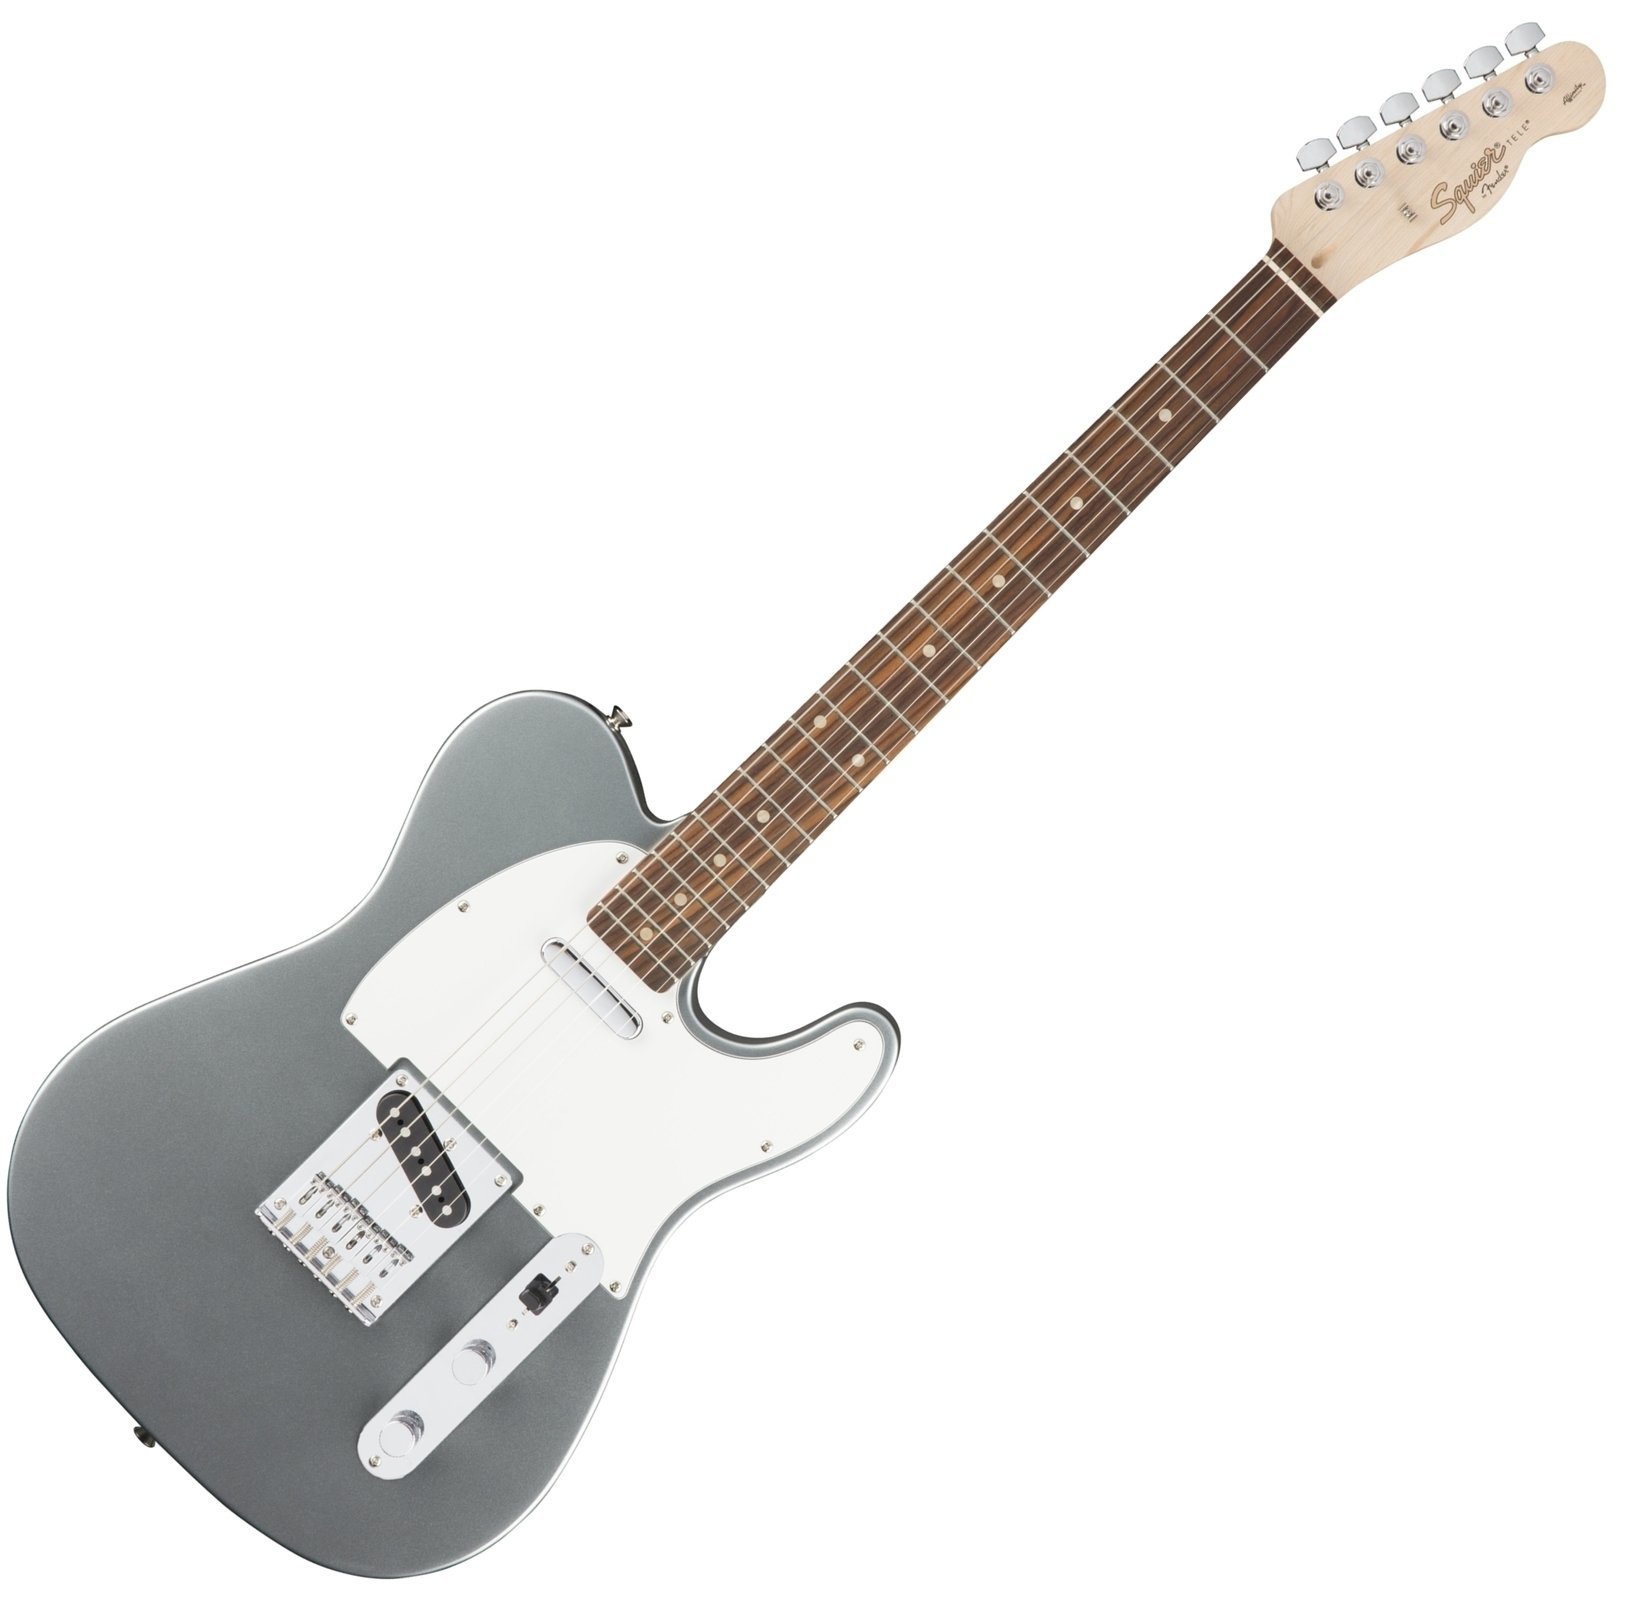 Electric guitar Fender Squier Affinity Telecaster IL Slick Silver